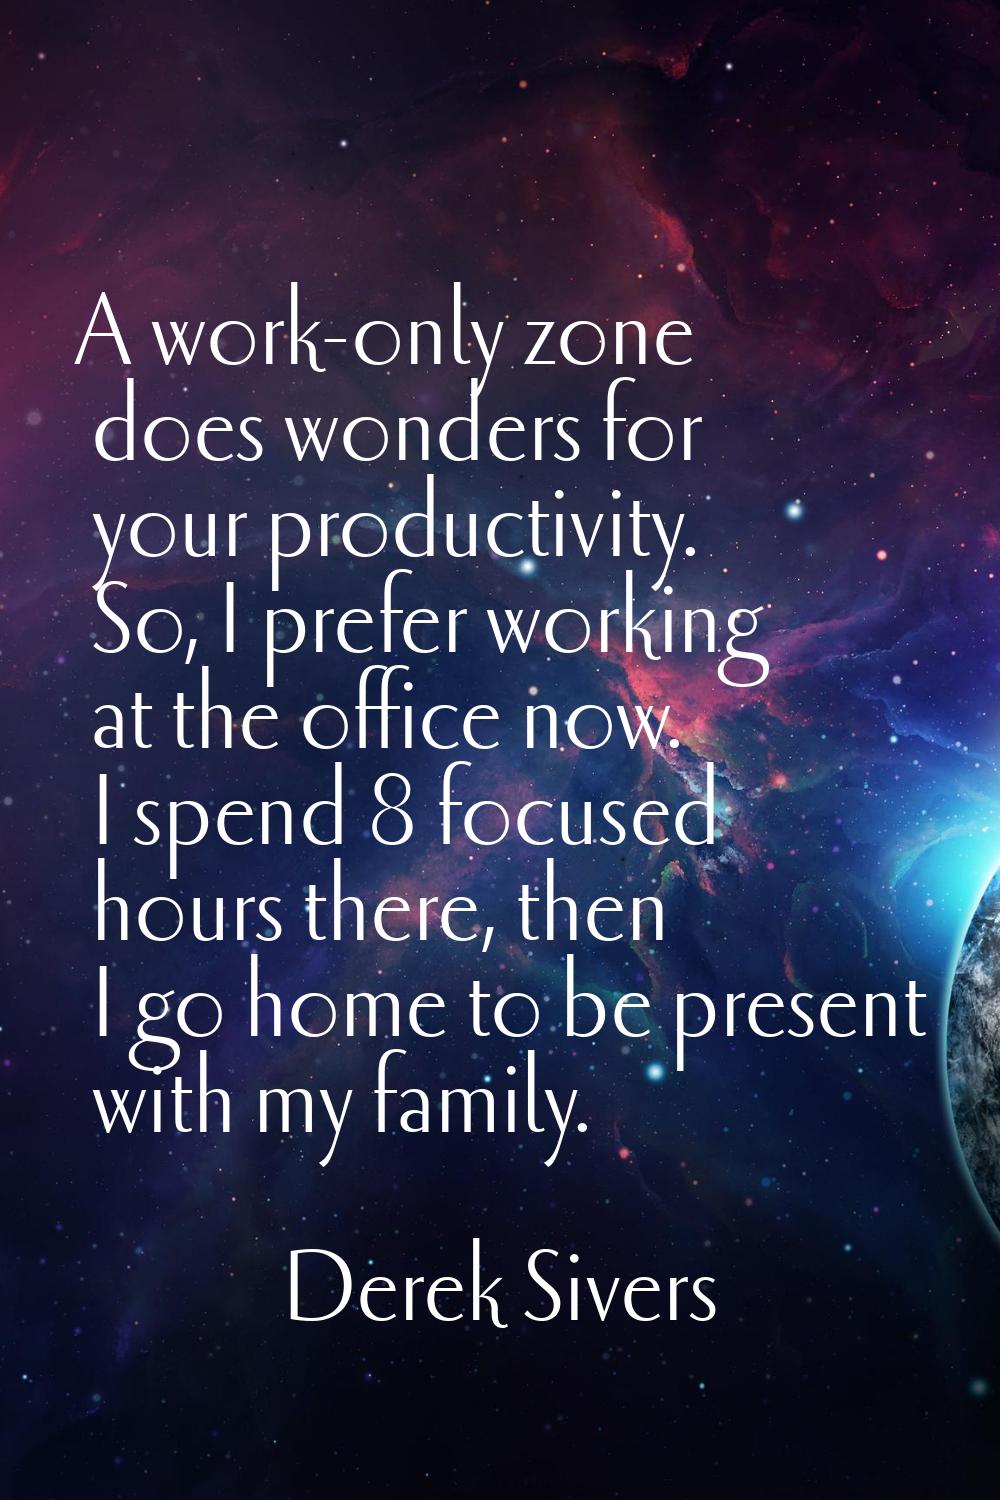 A work-only zone does wonders for your productivity. So, I prefer working at the office now. I spen